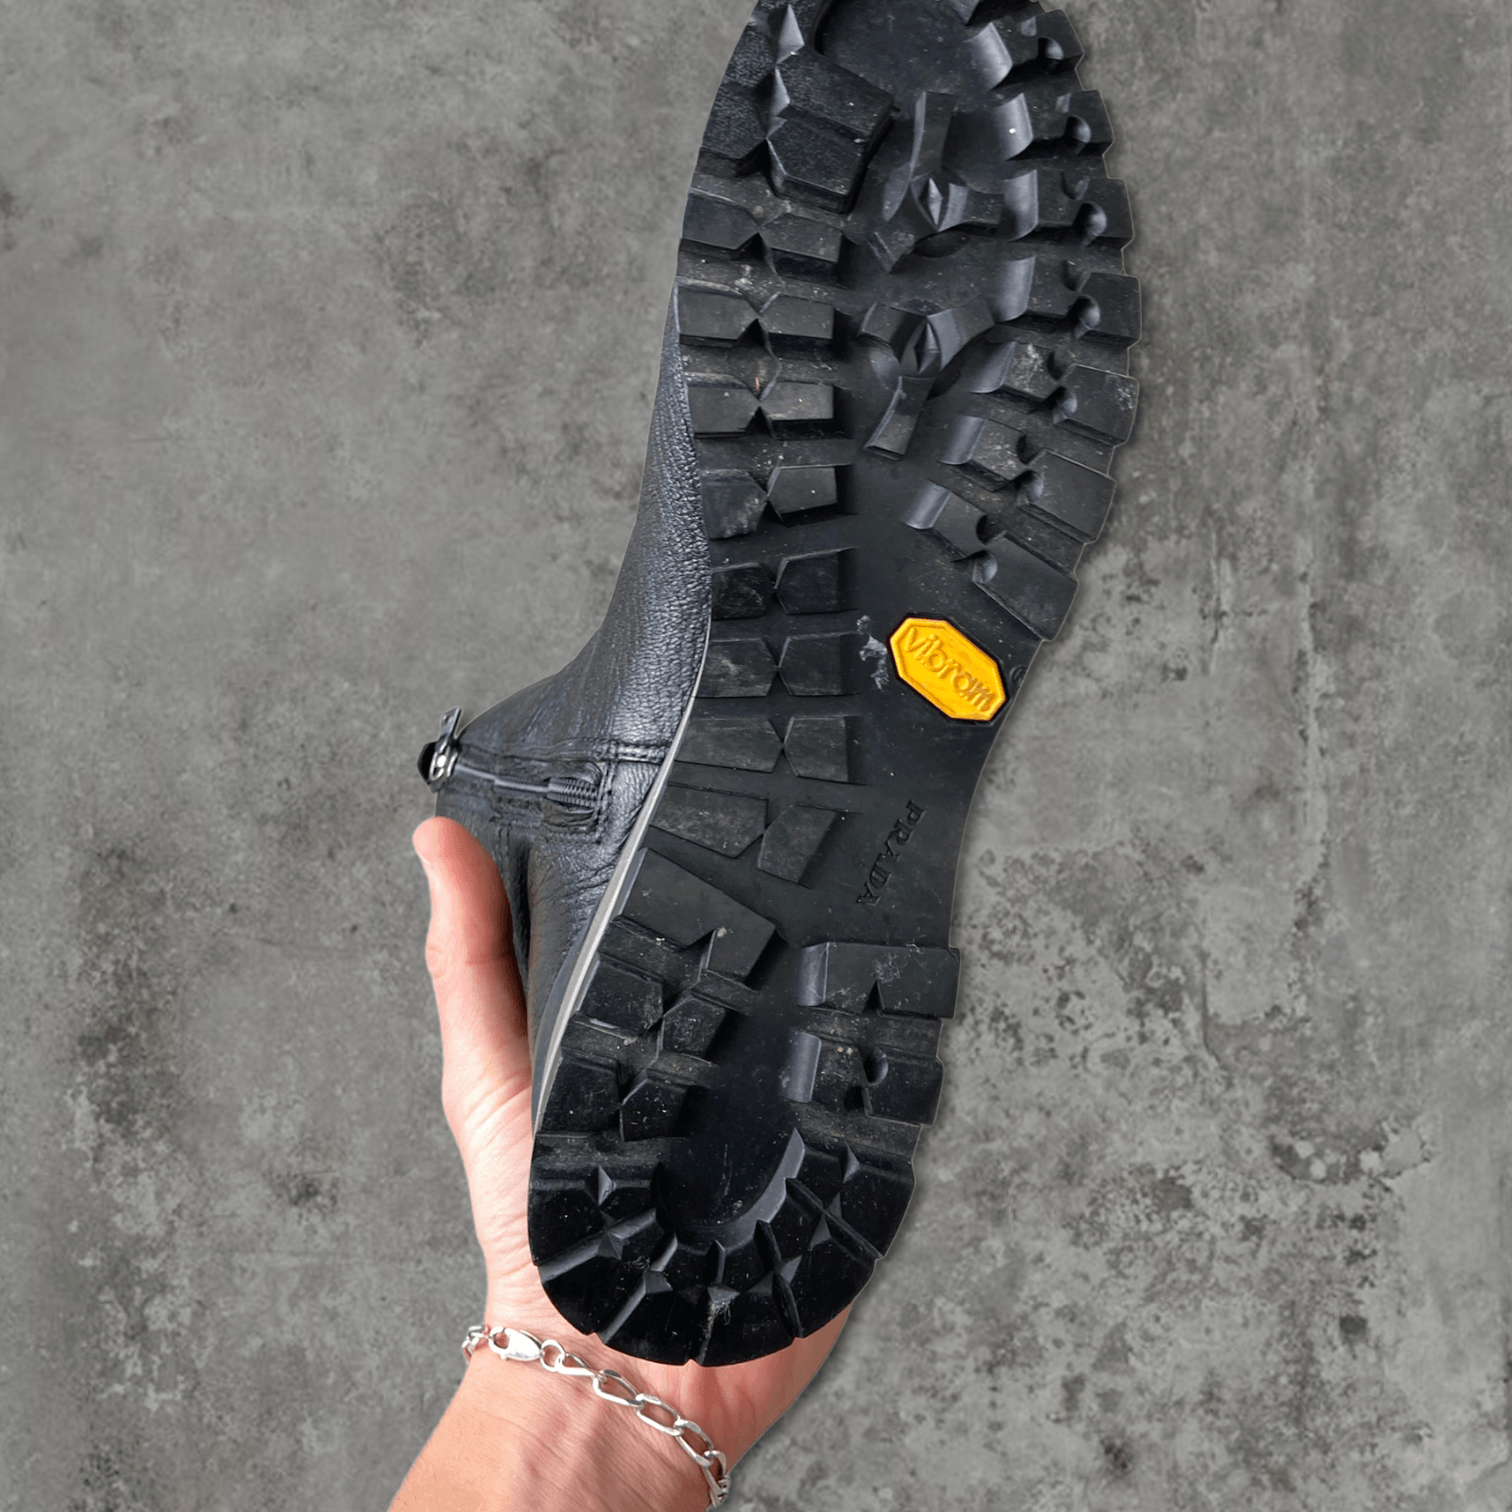 PRADA LEATHER VIBRAM SOLE BOOTS - Known Source